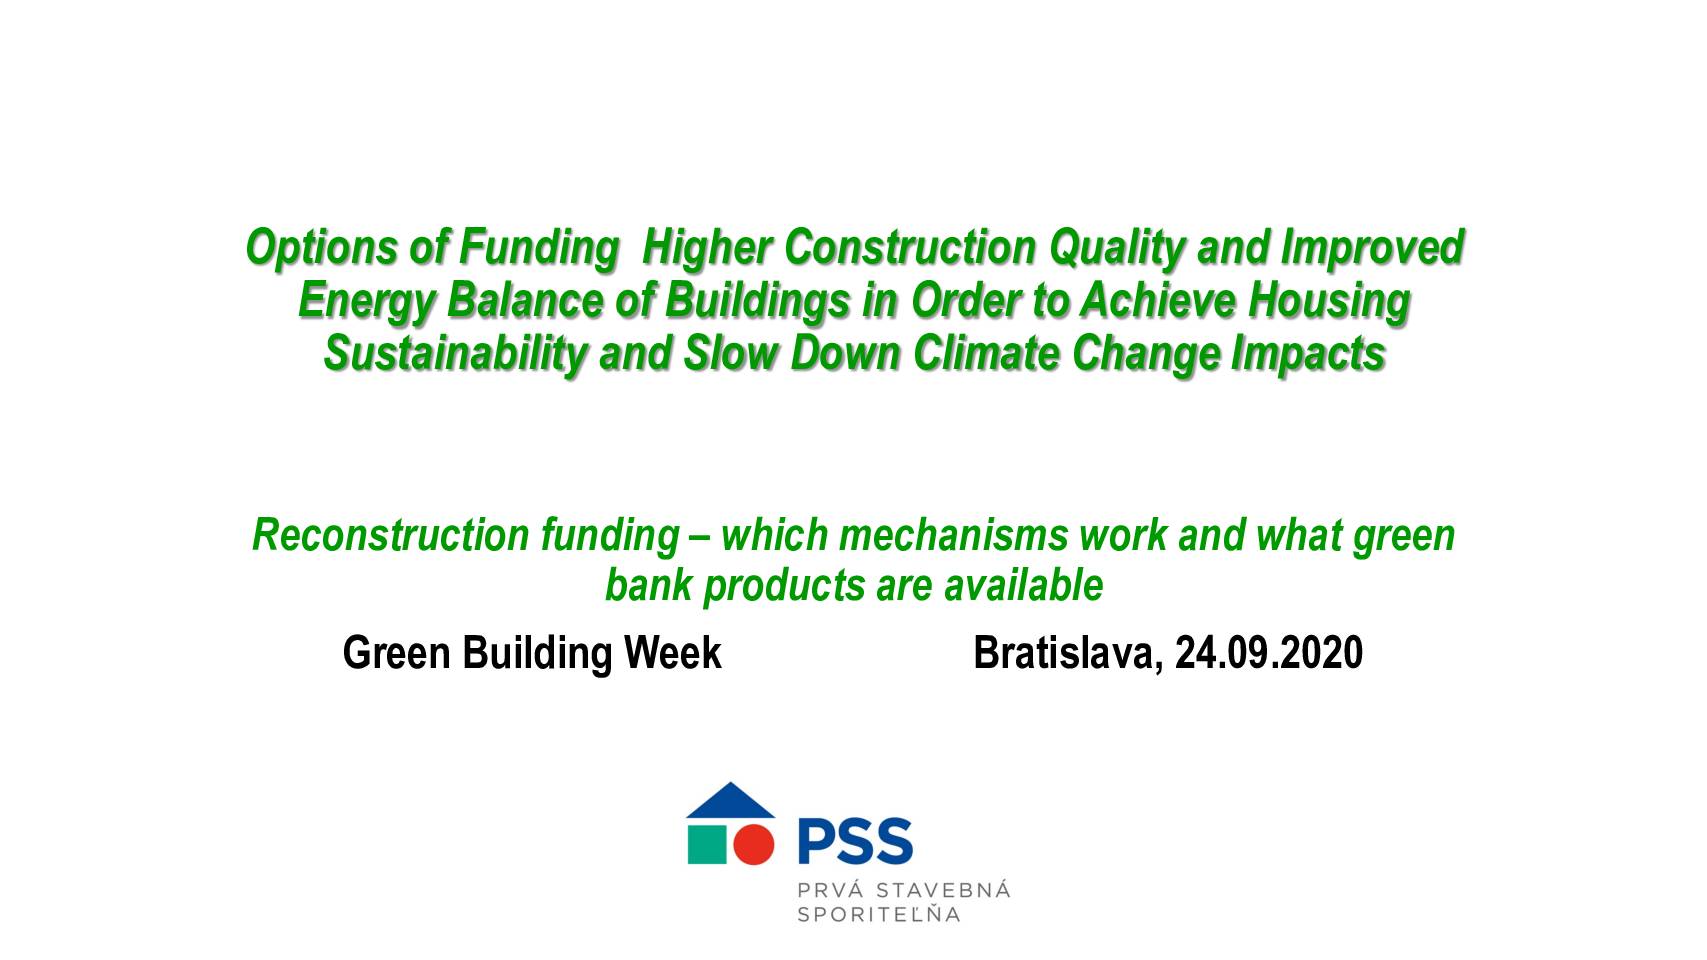 Options of Funding Higher Construction Quality and Improved Energy Balance of Buildings in Order to Achieve Housing Sustainability and Slow Down Climate Change Impacts